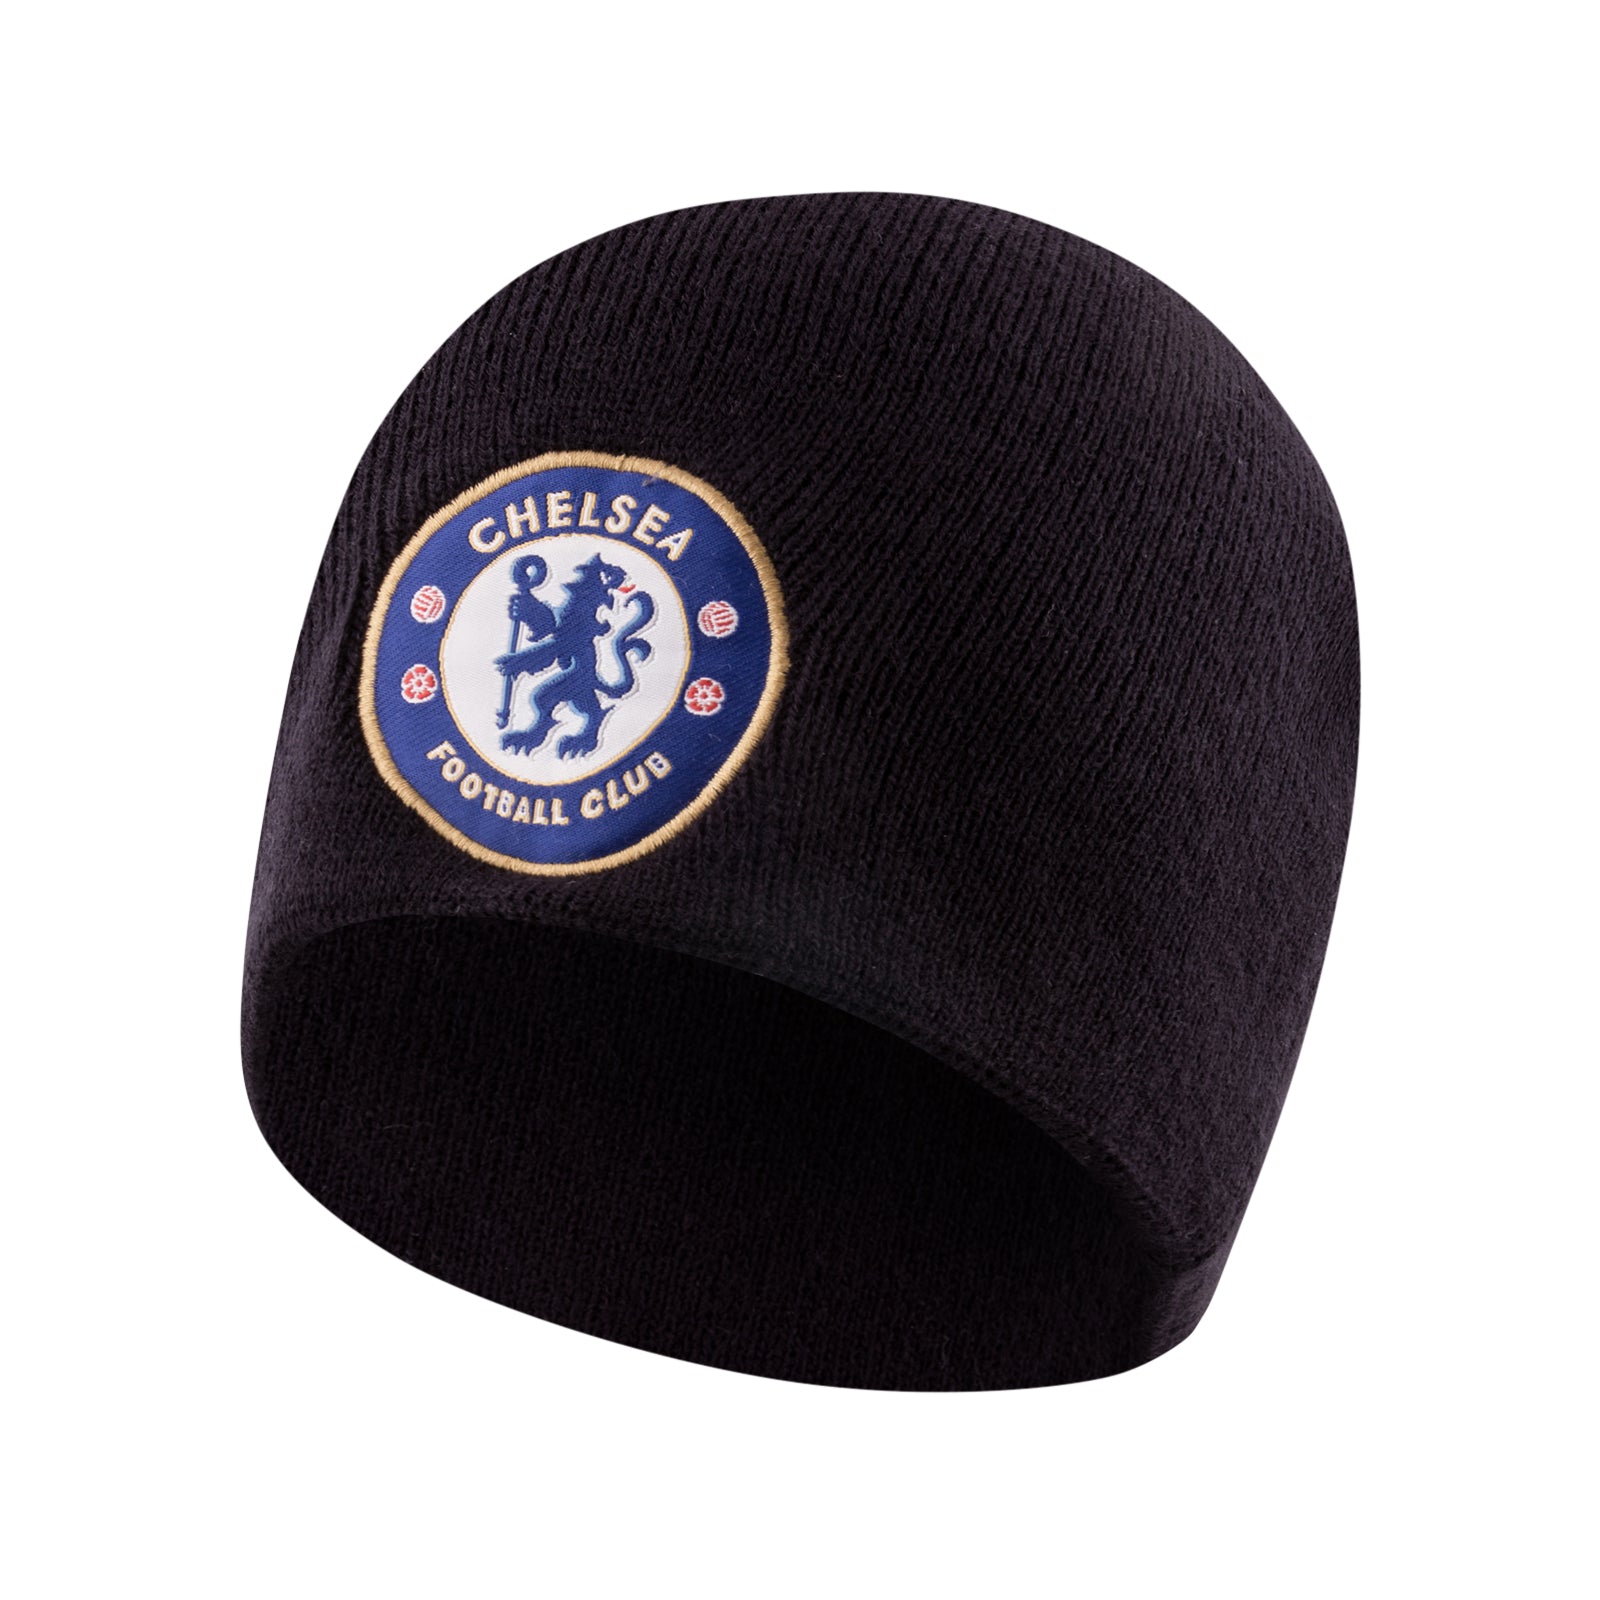 Chelsea FC Kids Knitted Hat